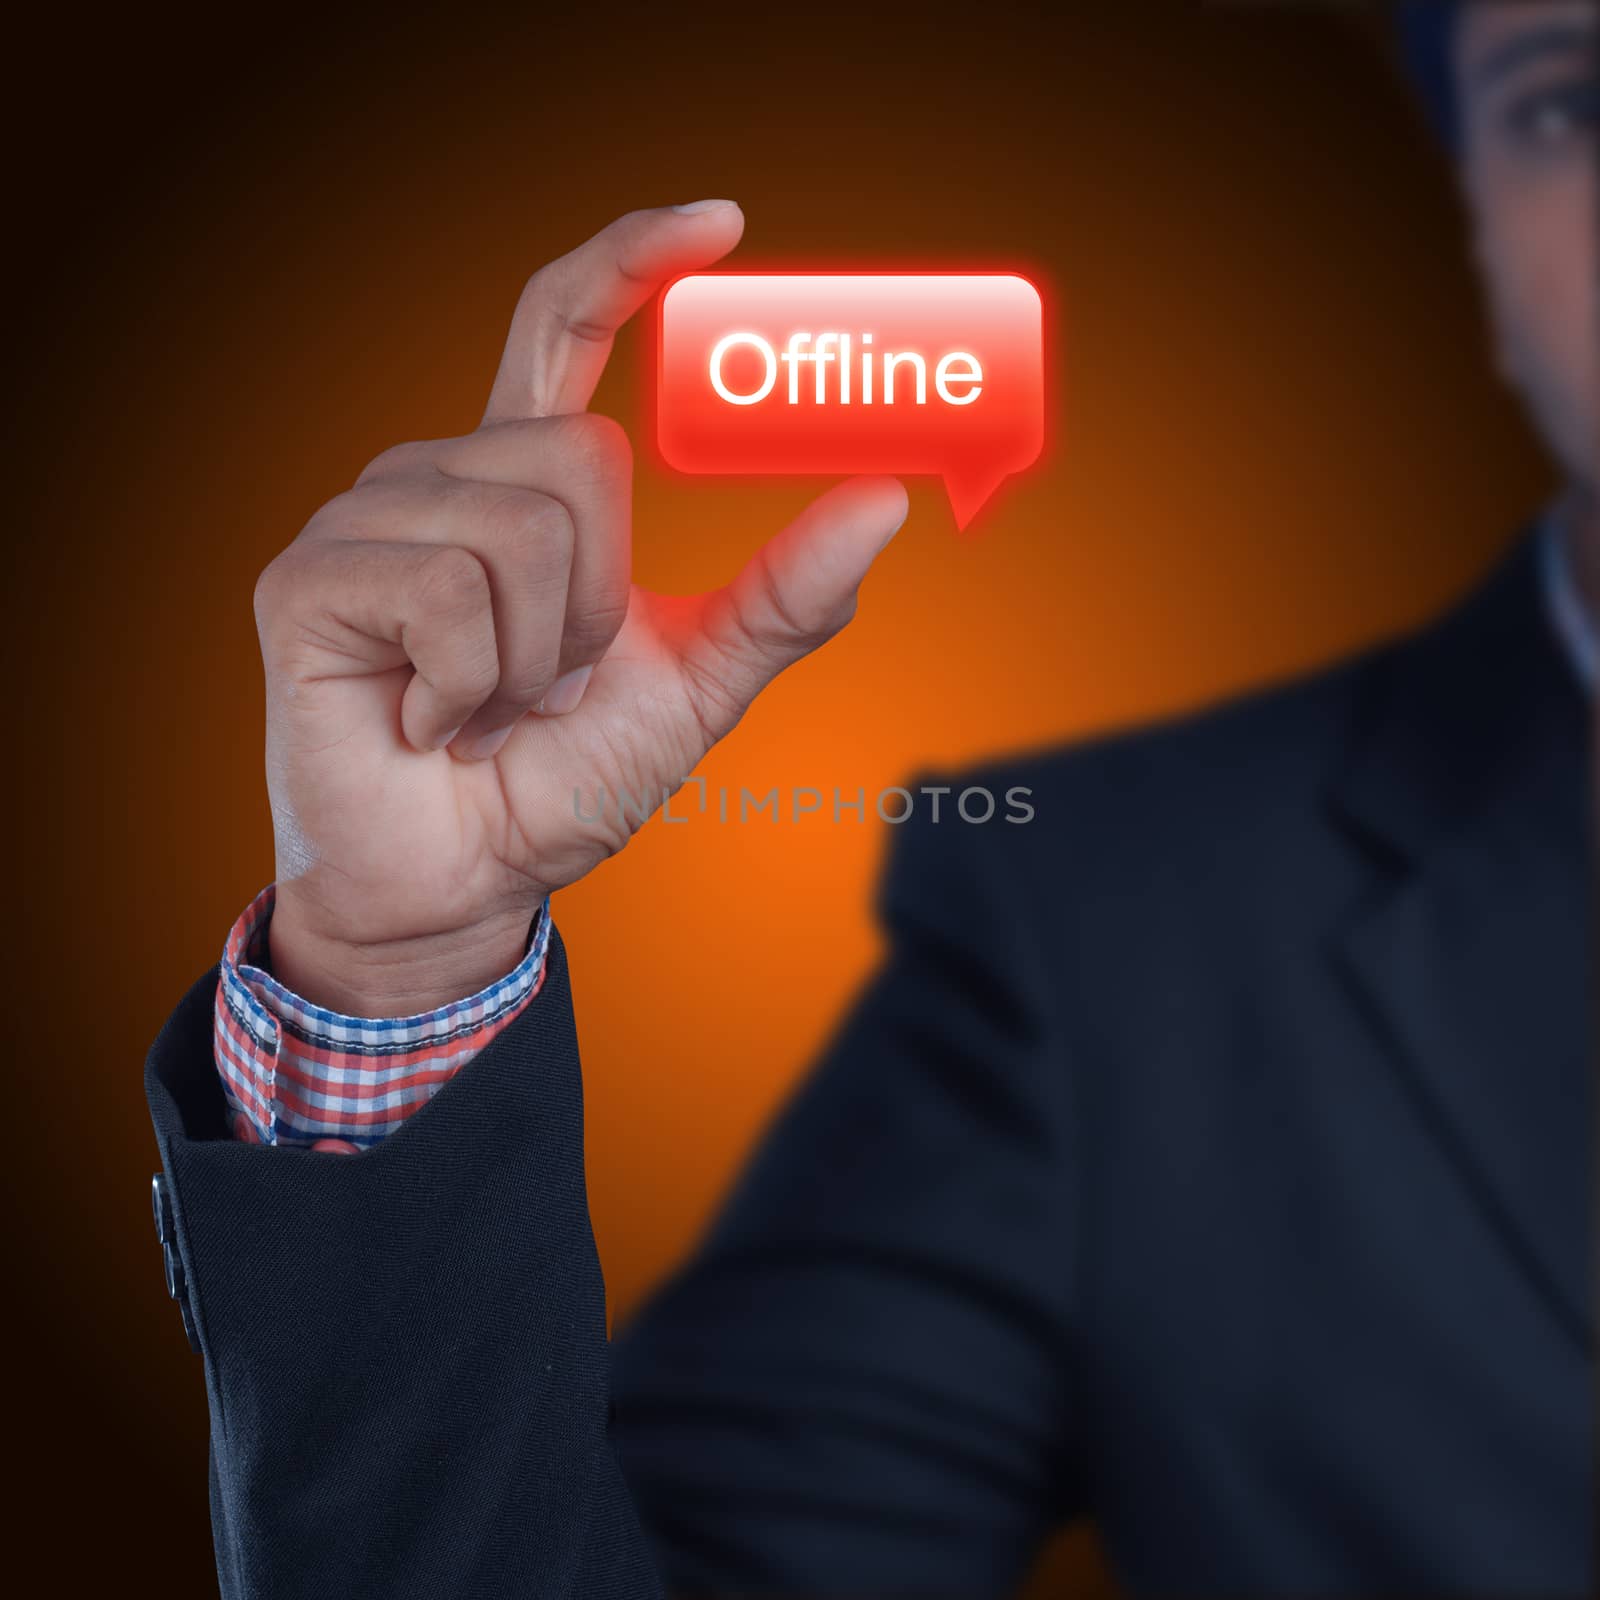 Business man with offline button by cuteimage